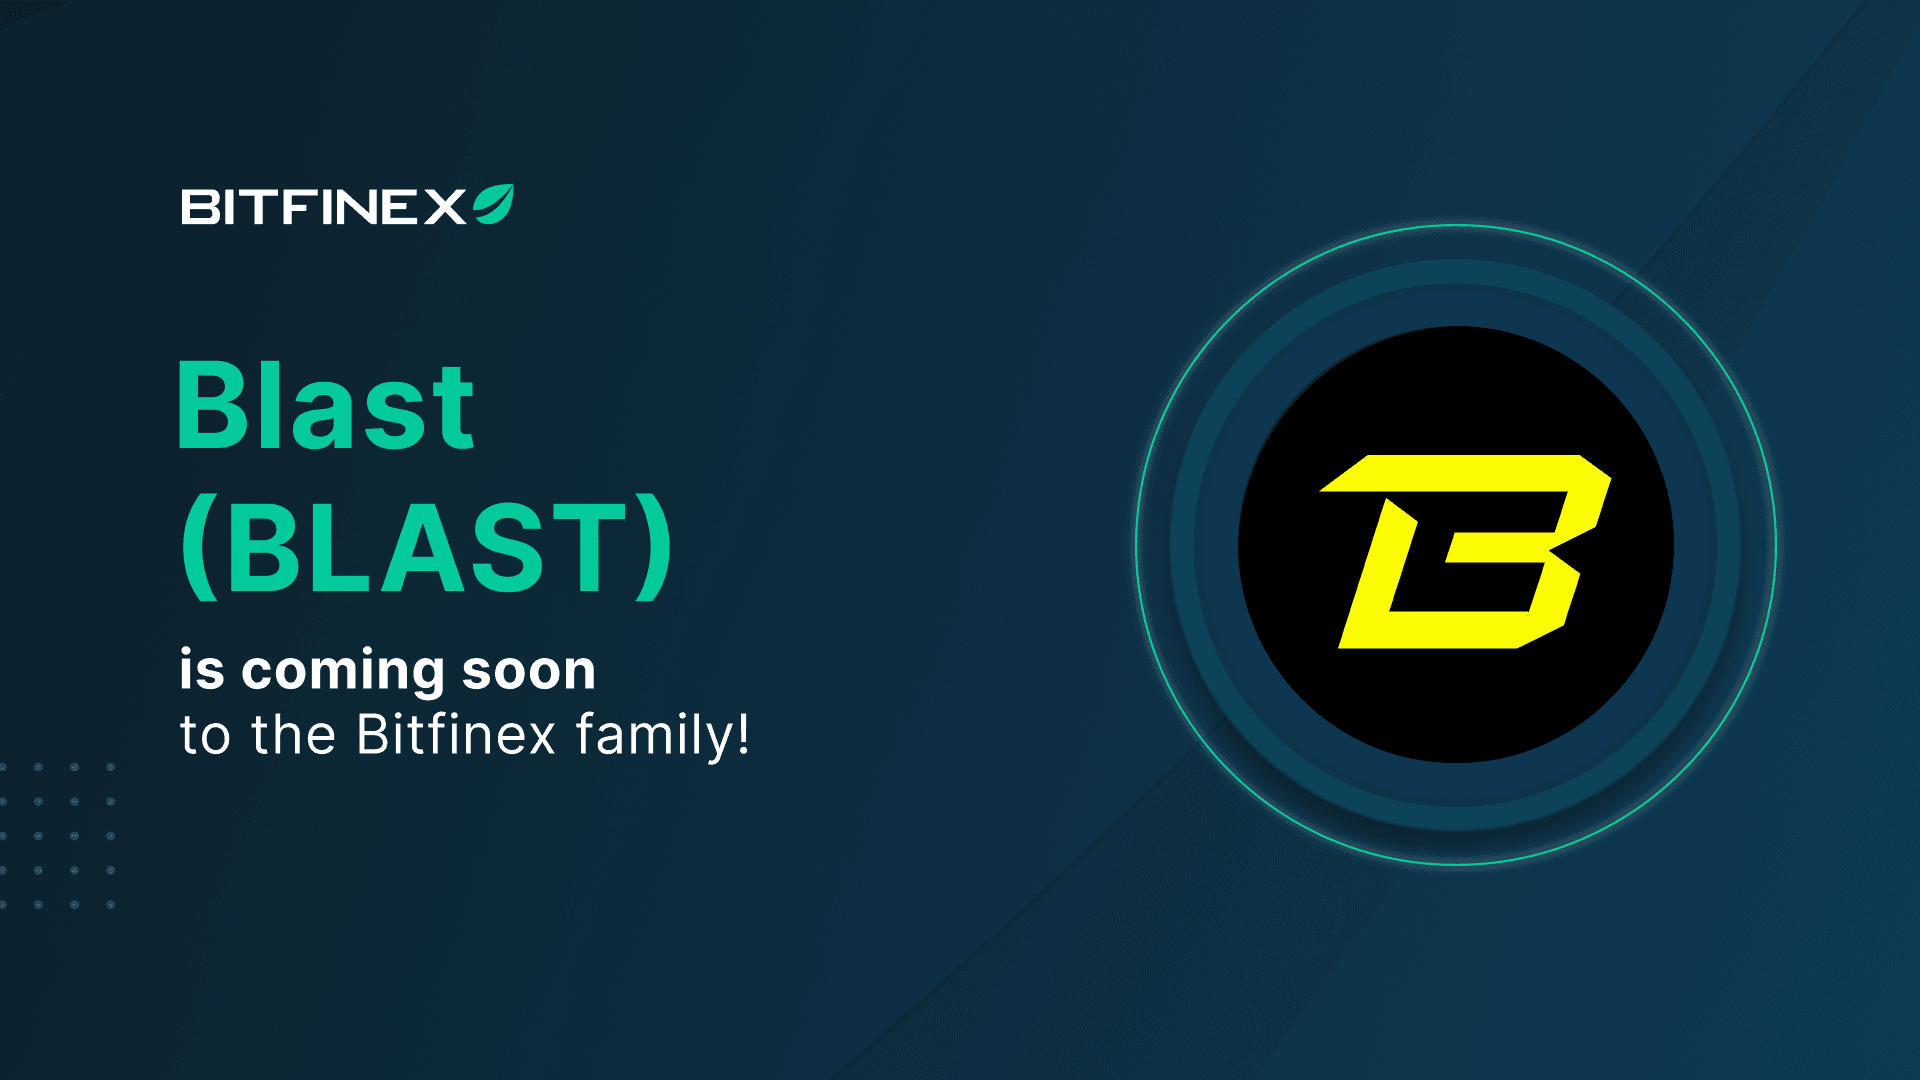 Bitfinex to Be One of First Exchanges to List BLAST, Native Token of Blast L2